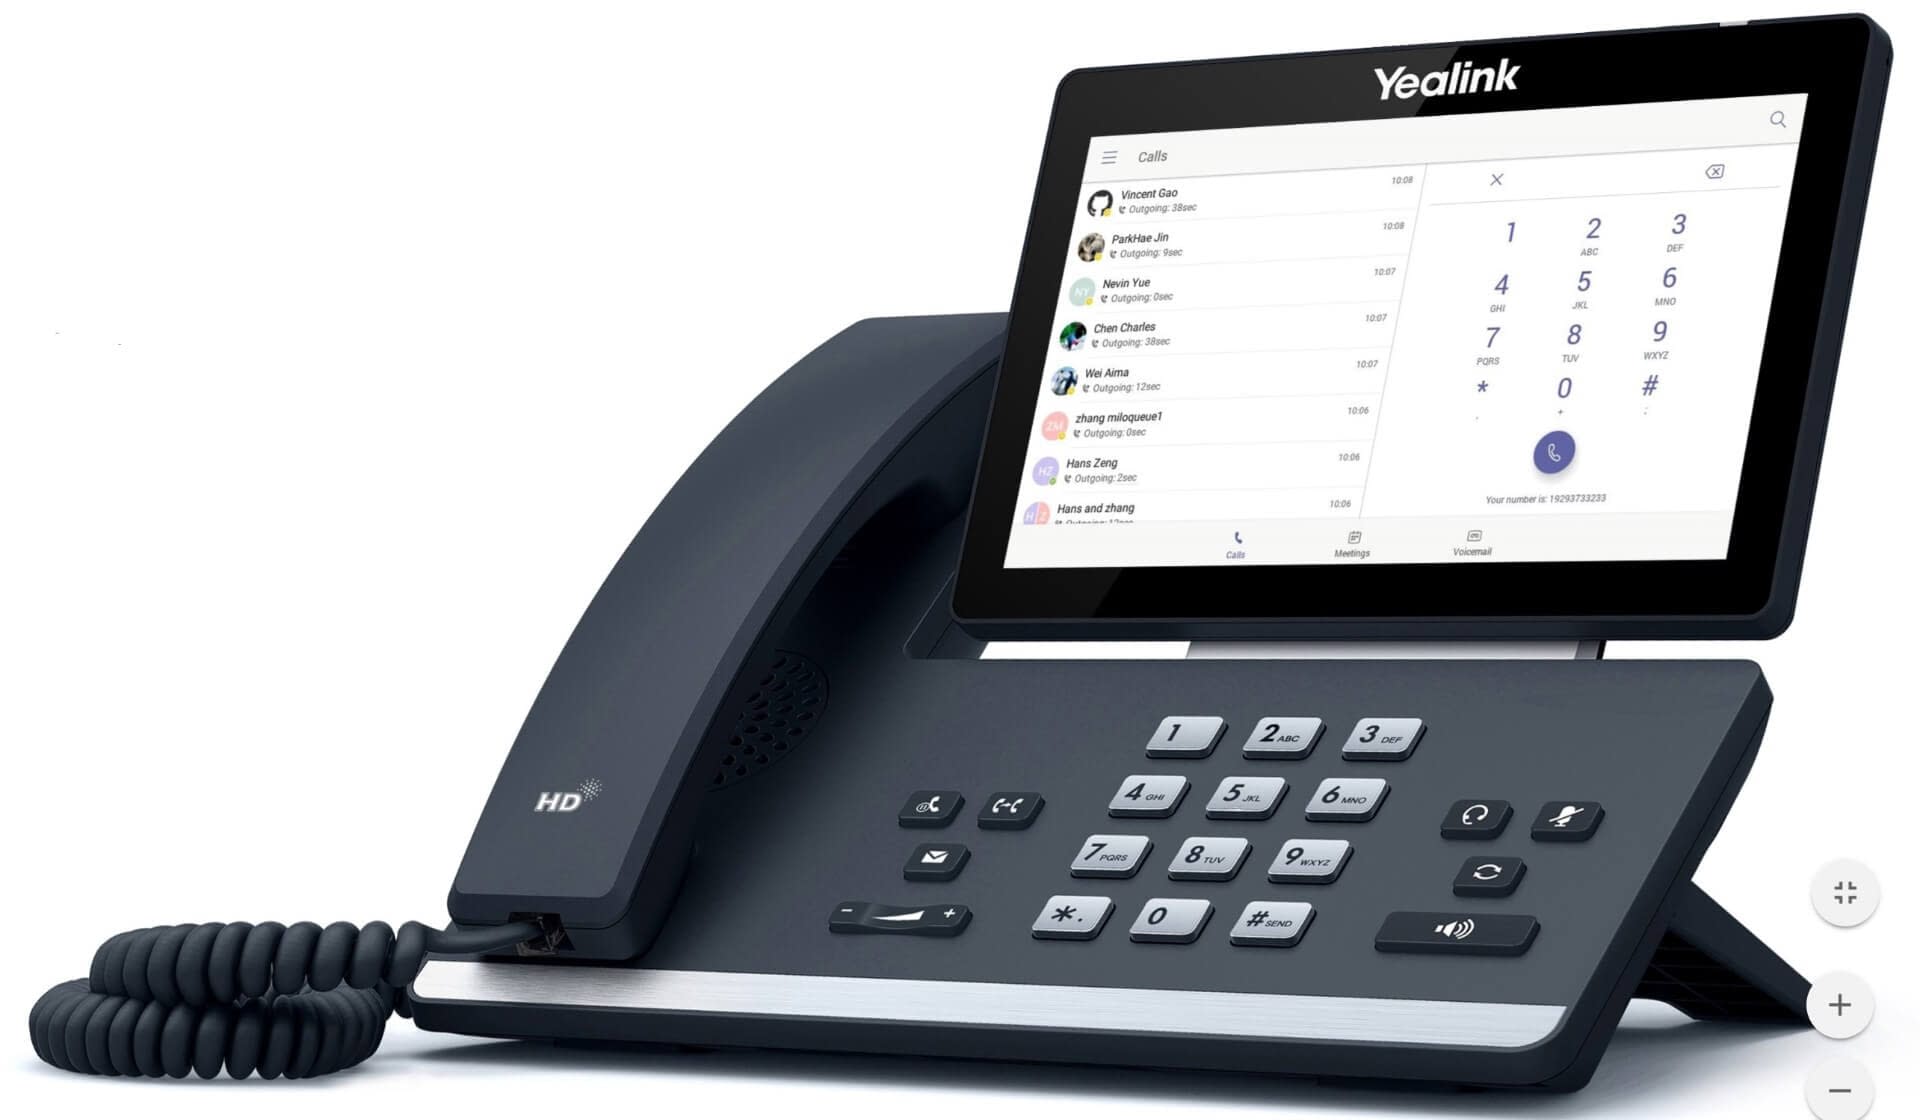 Yealink T58A Business IP Phone Image